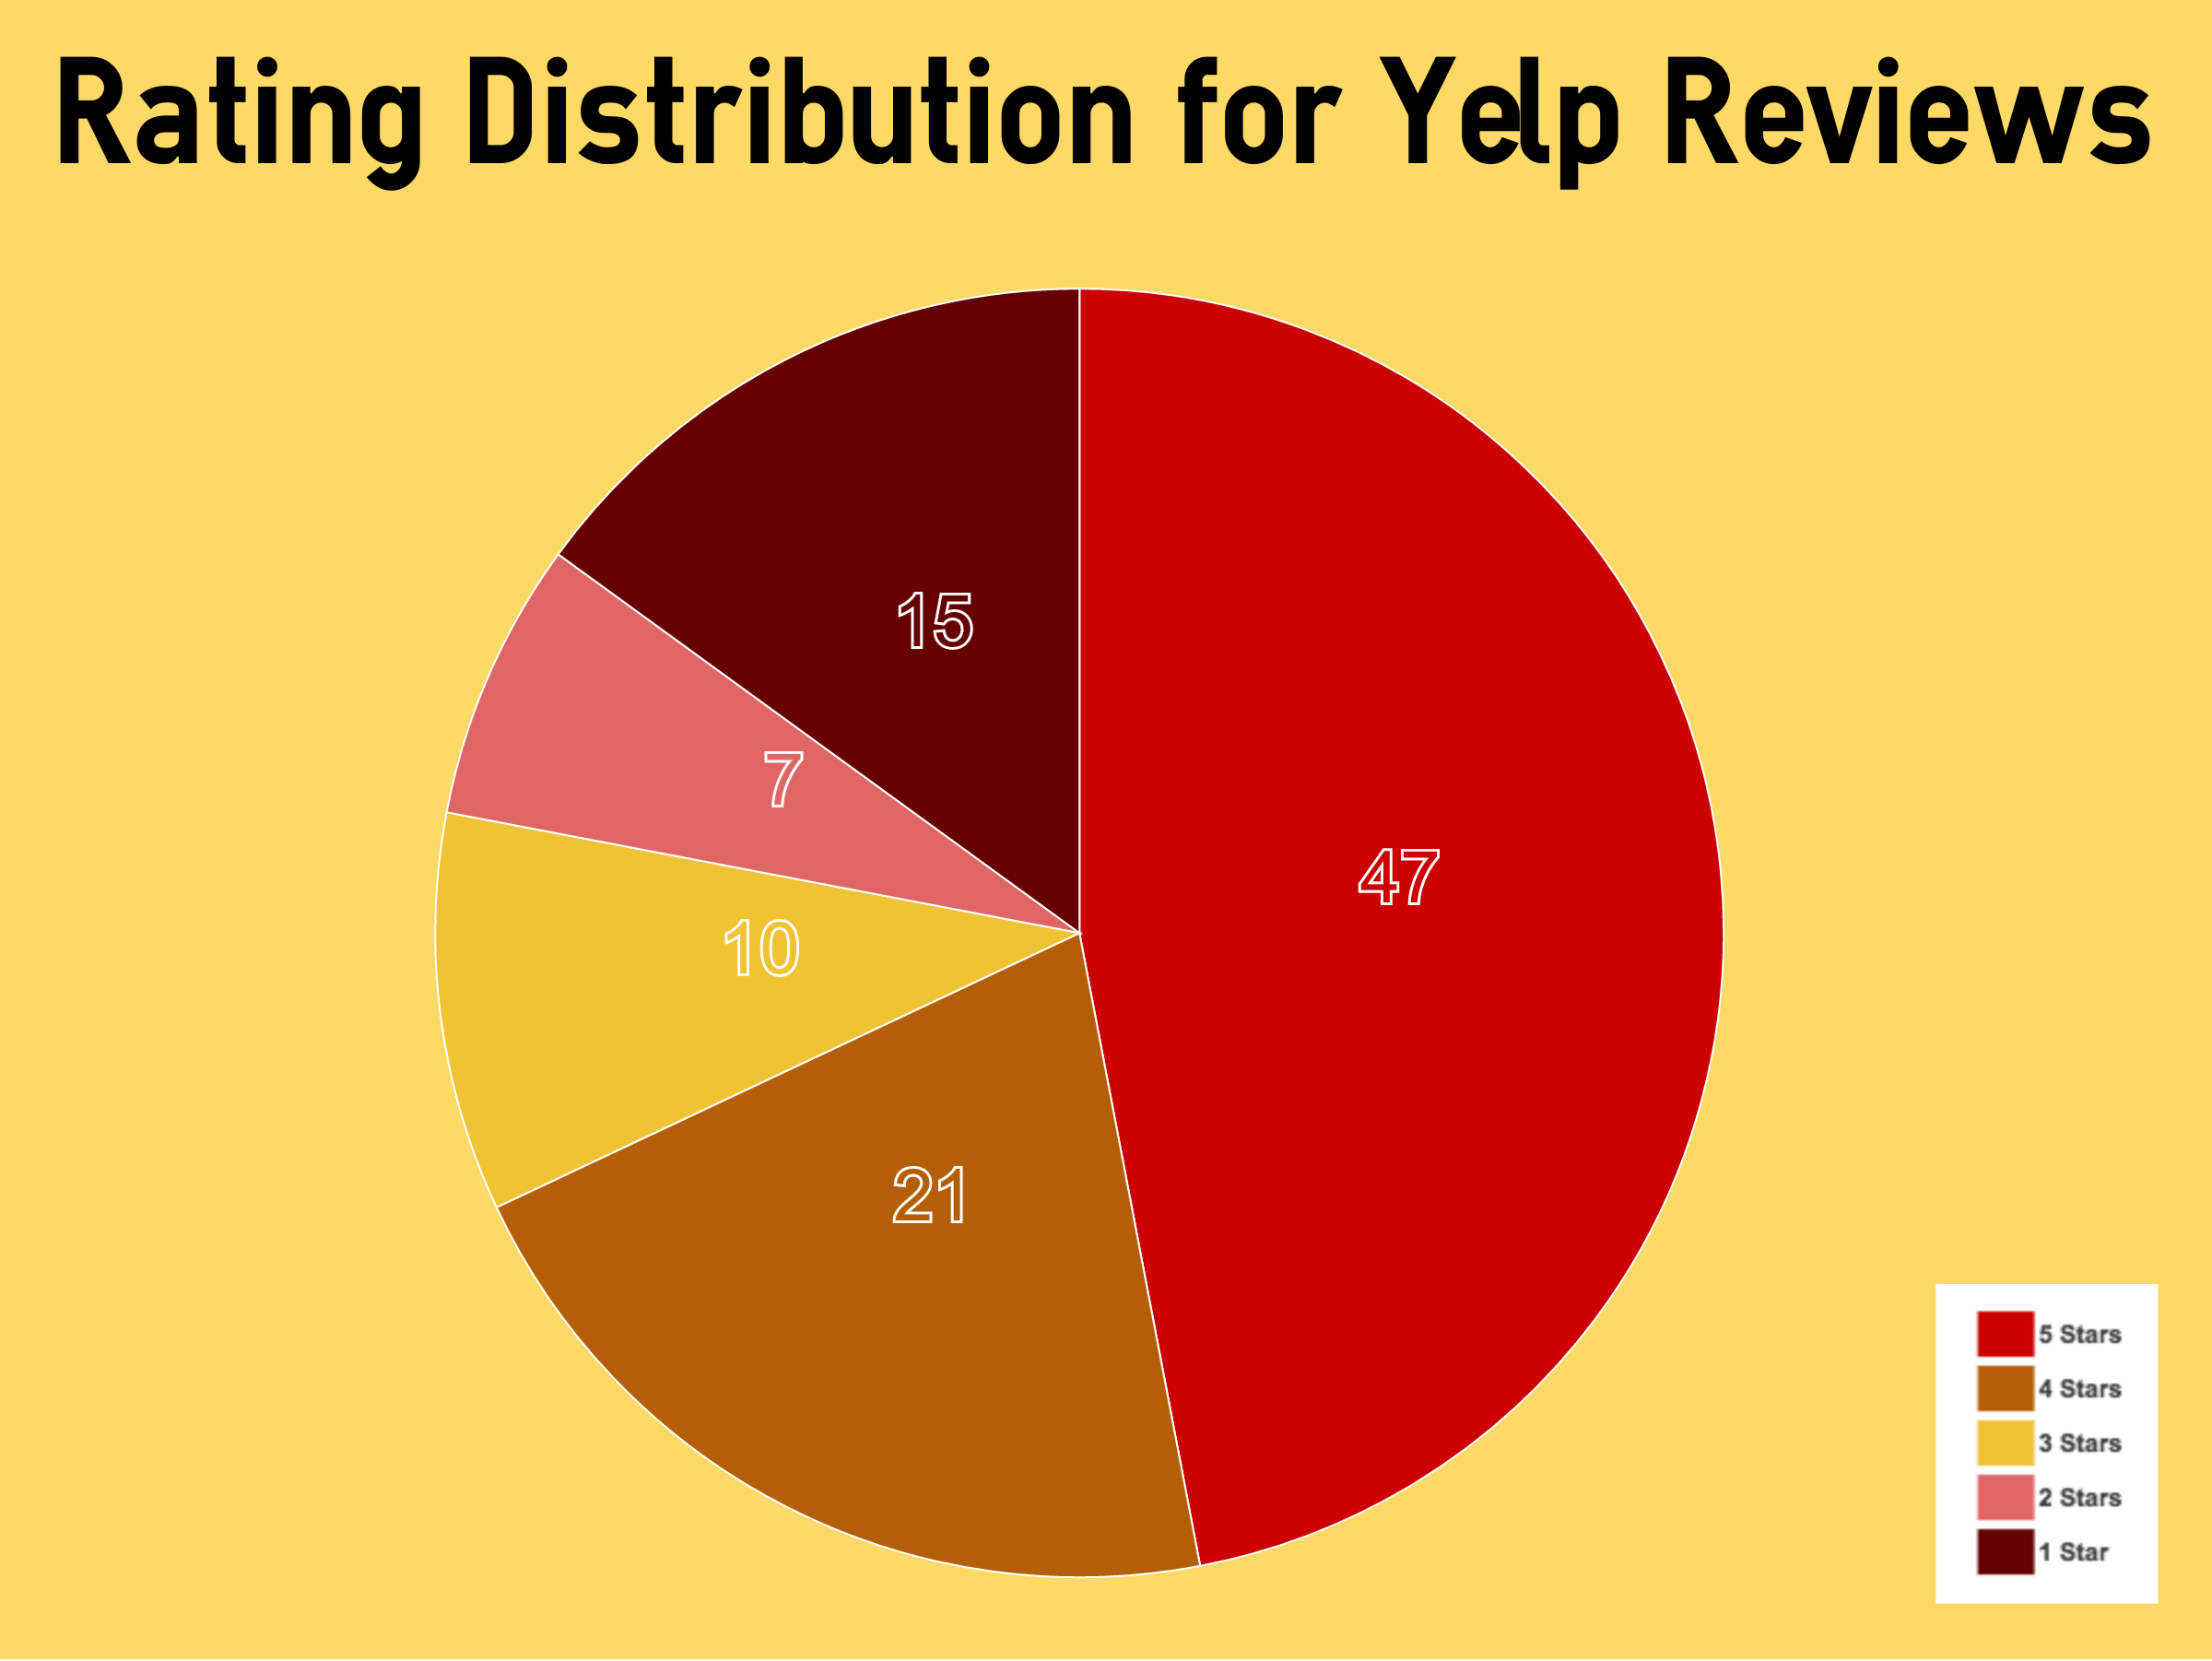 what percentage of Yelp reviews are 1-star?